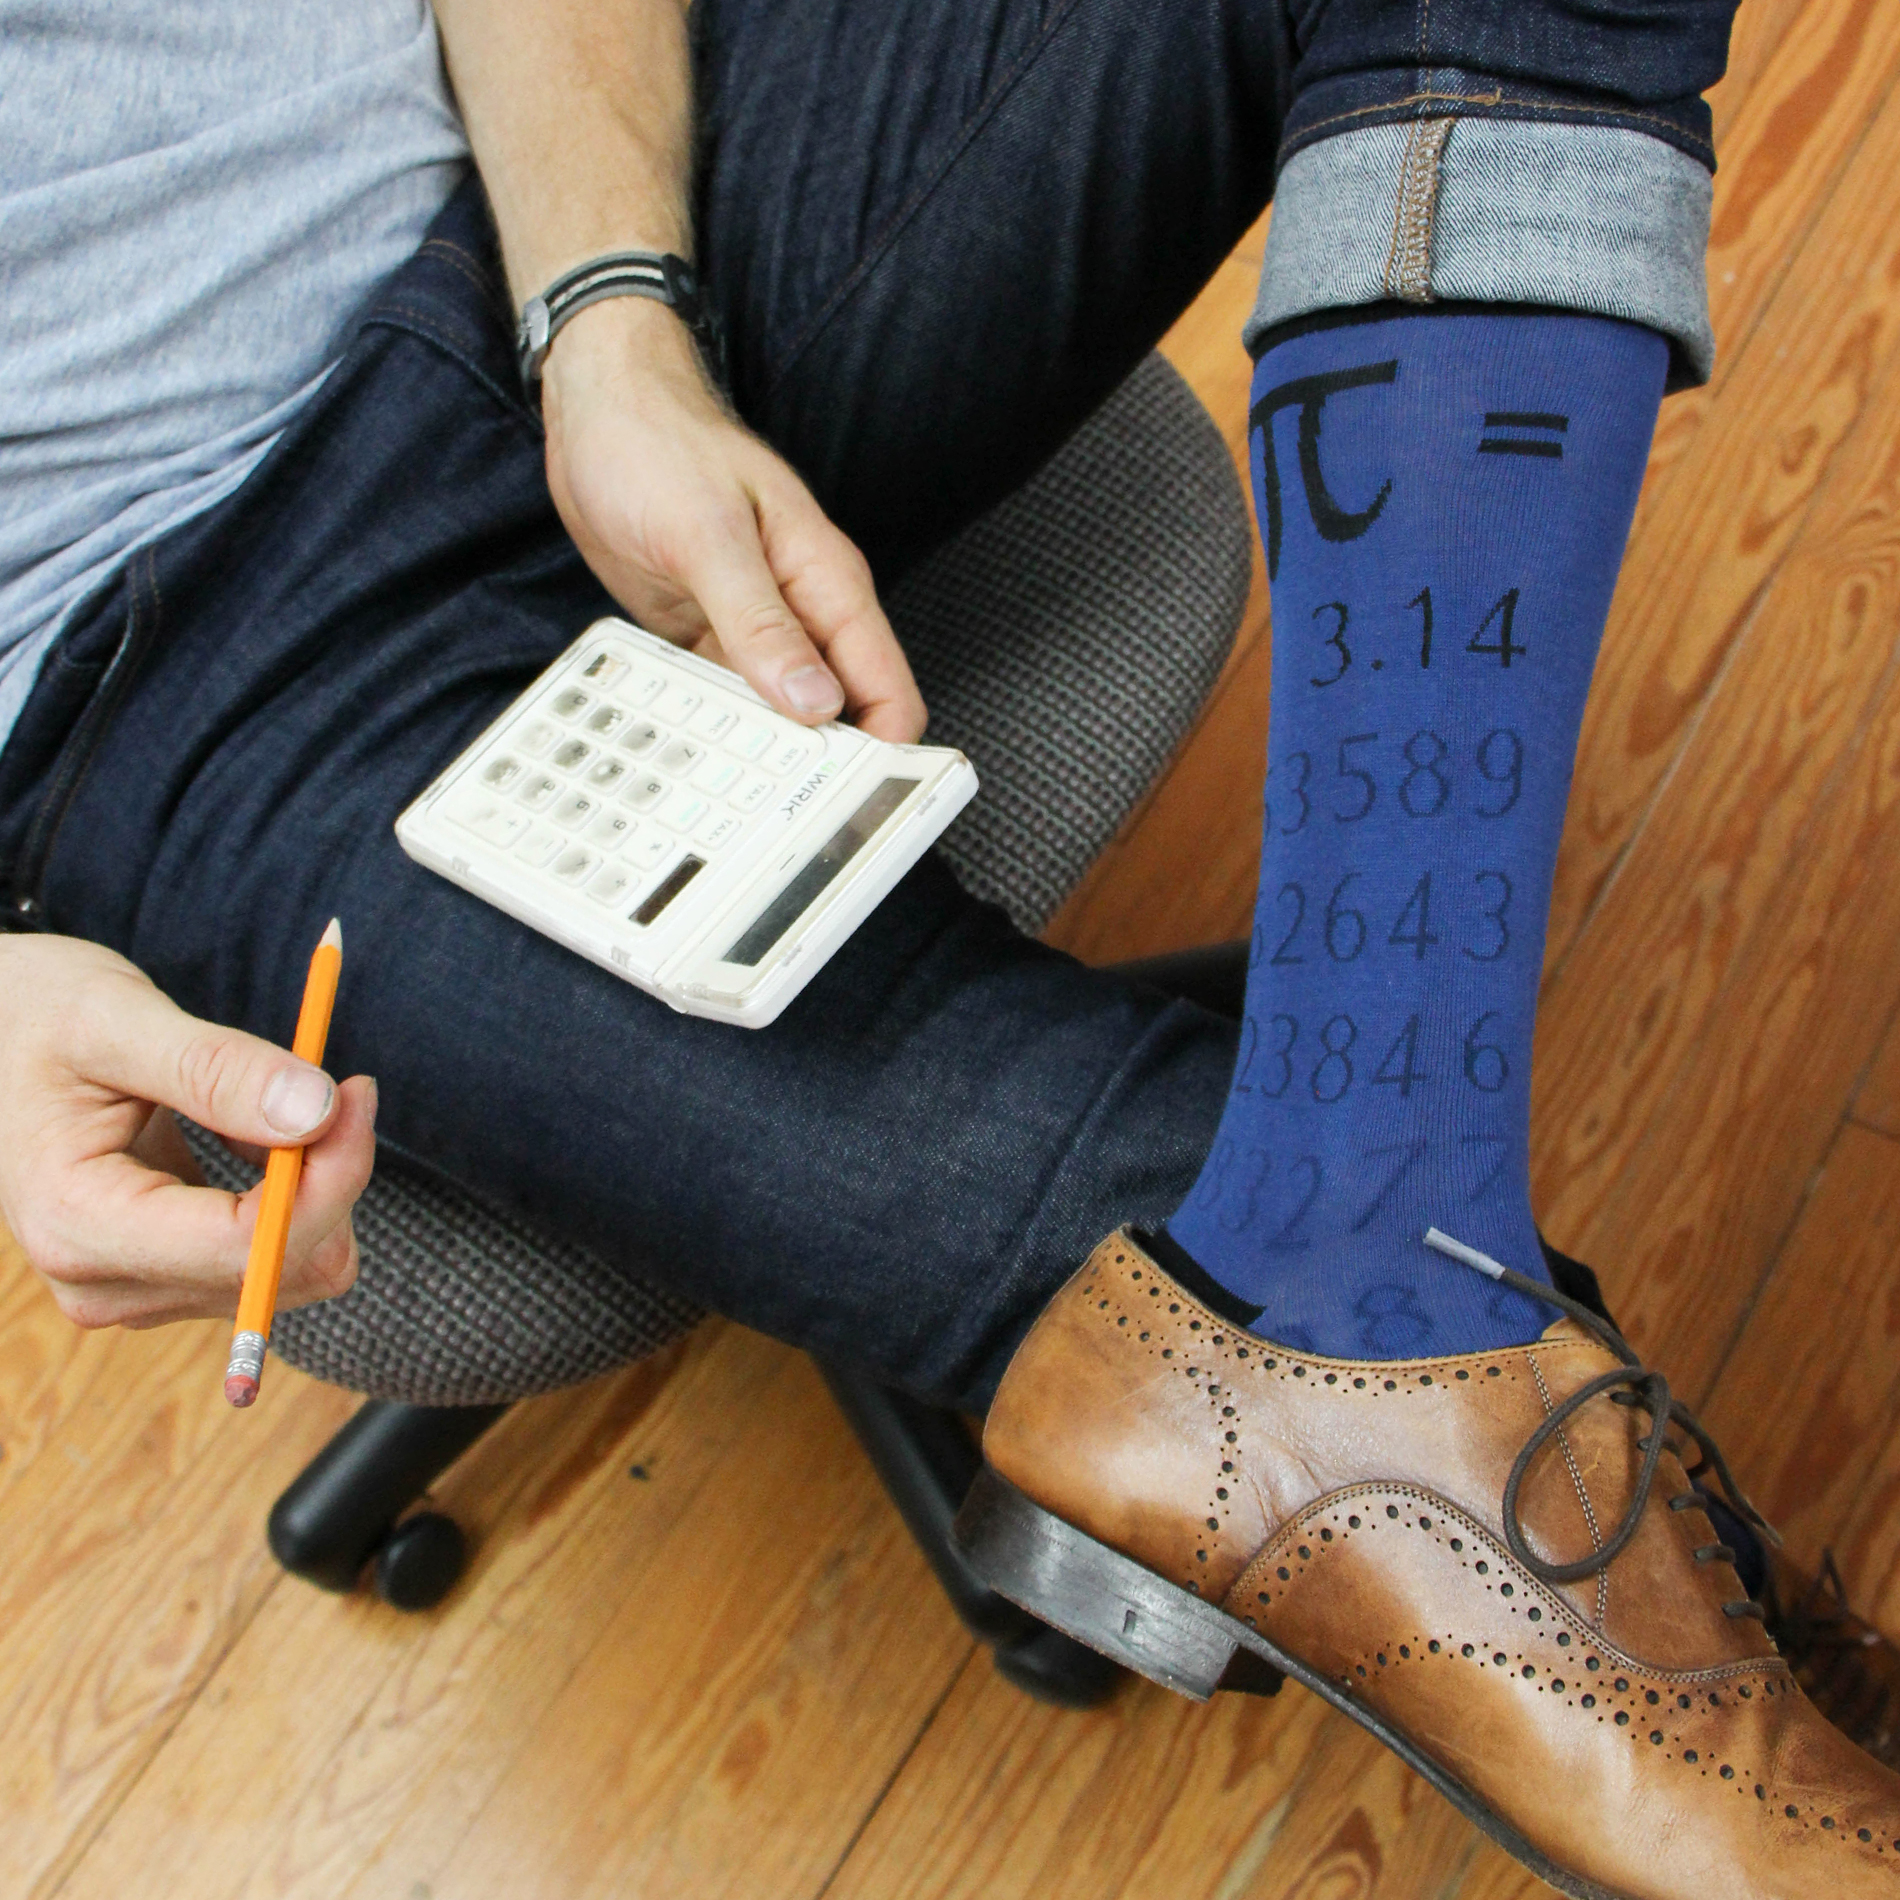 Photo of man sitting in chair holding a calculator and pencil, wearing jeans and dark blue socks that show the value of pi.